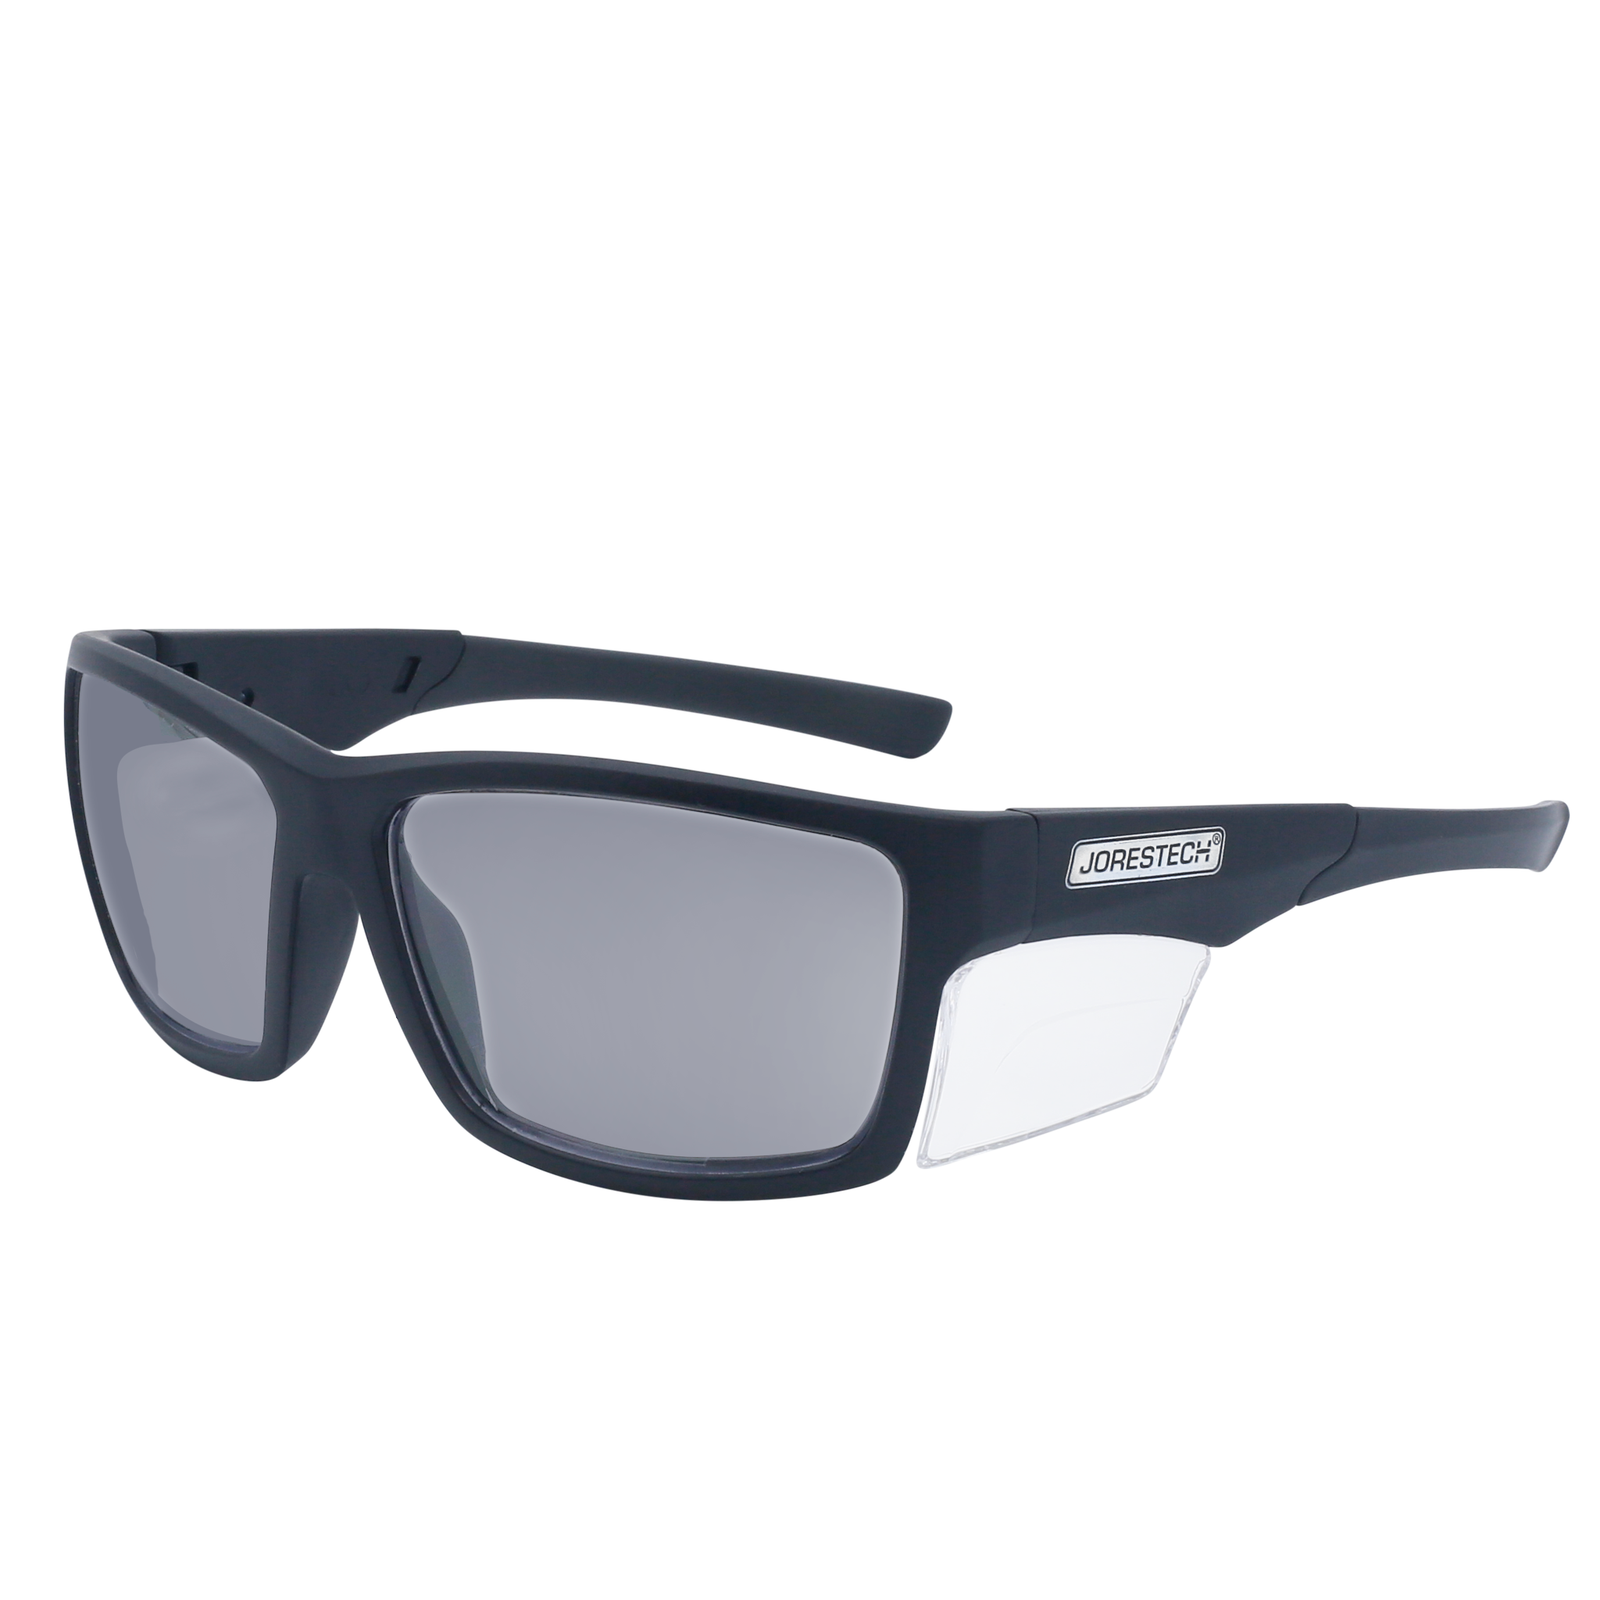 Image shows a diagonal view of the smoke JORESTECH safety eyeglasses with transparent side shield for high impact protection. These safety glasses are ANSI compliant and have black frame and smoke polycarbonate lenses. The background of the image is white